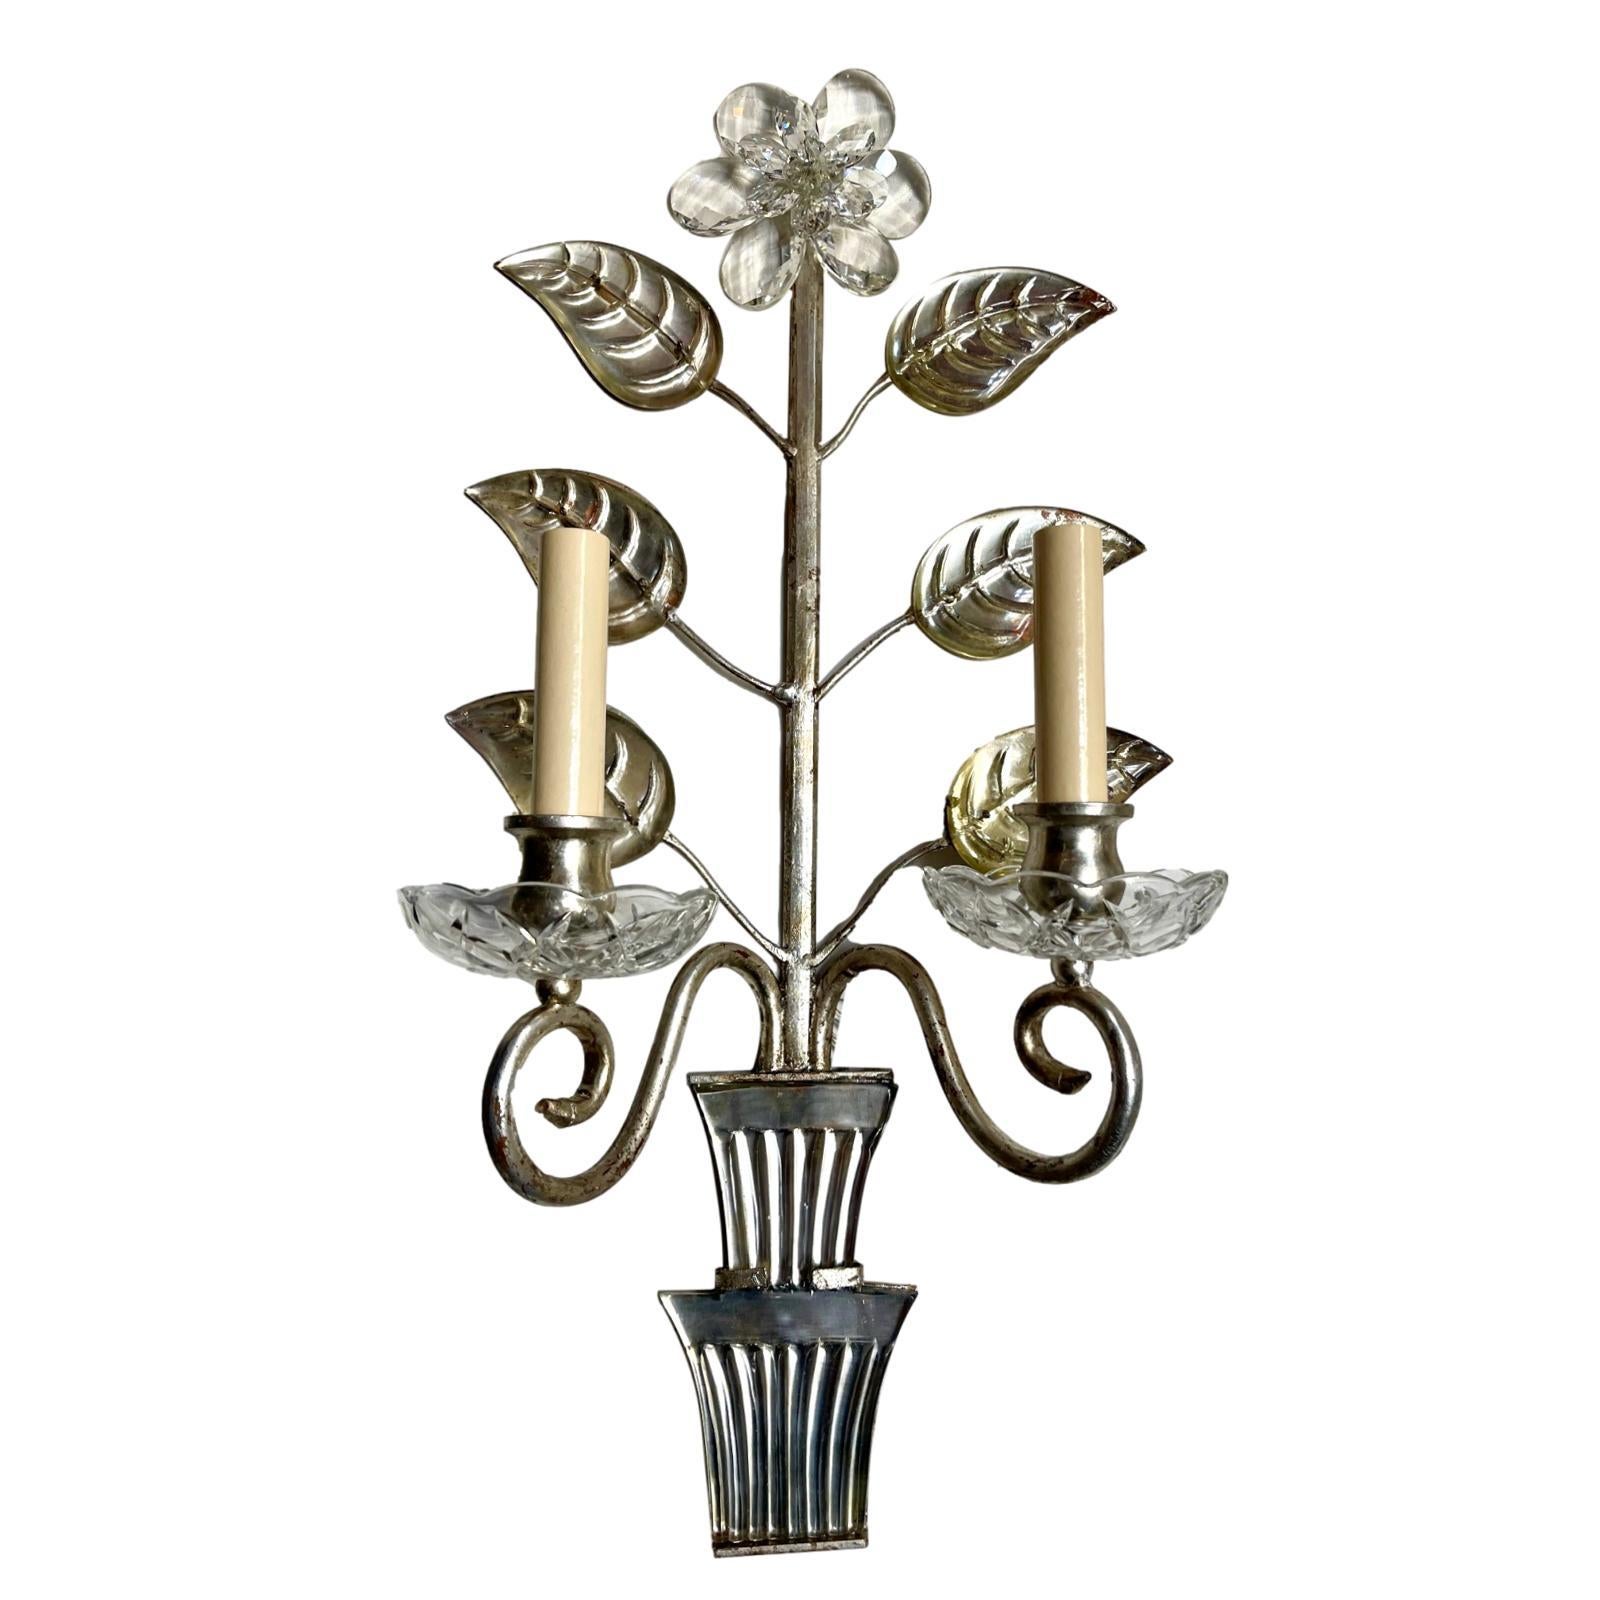 Pair of French circa 1960s two-arm silver-leafed sconces with molded and mirrored glass leaves and crystal flowers.

Measurements:
Height: 22